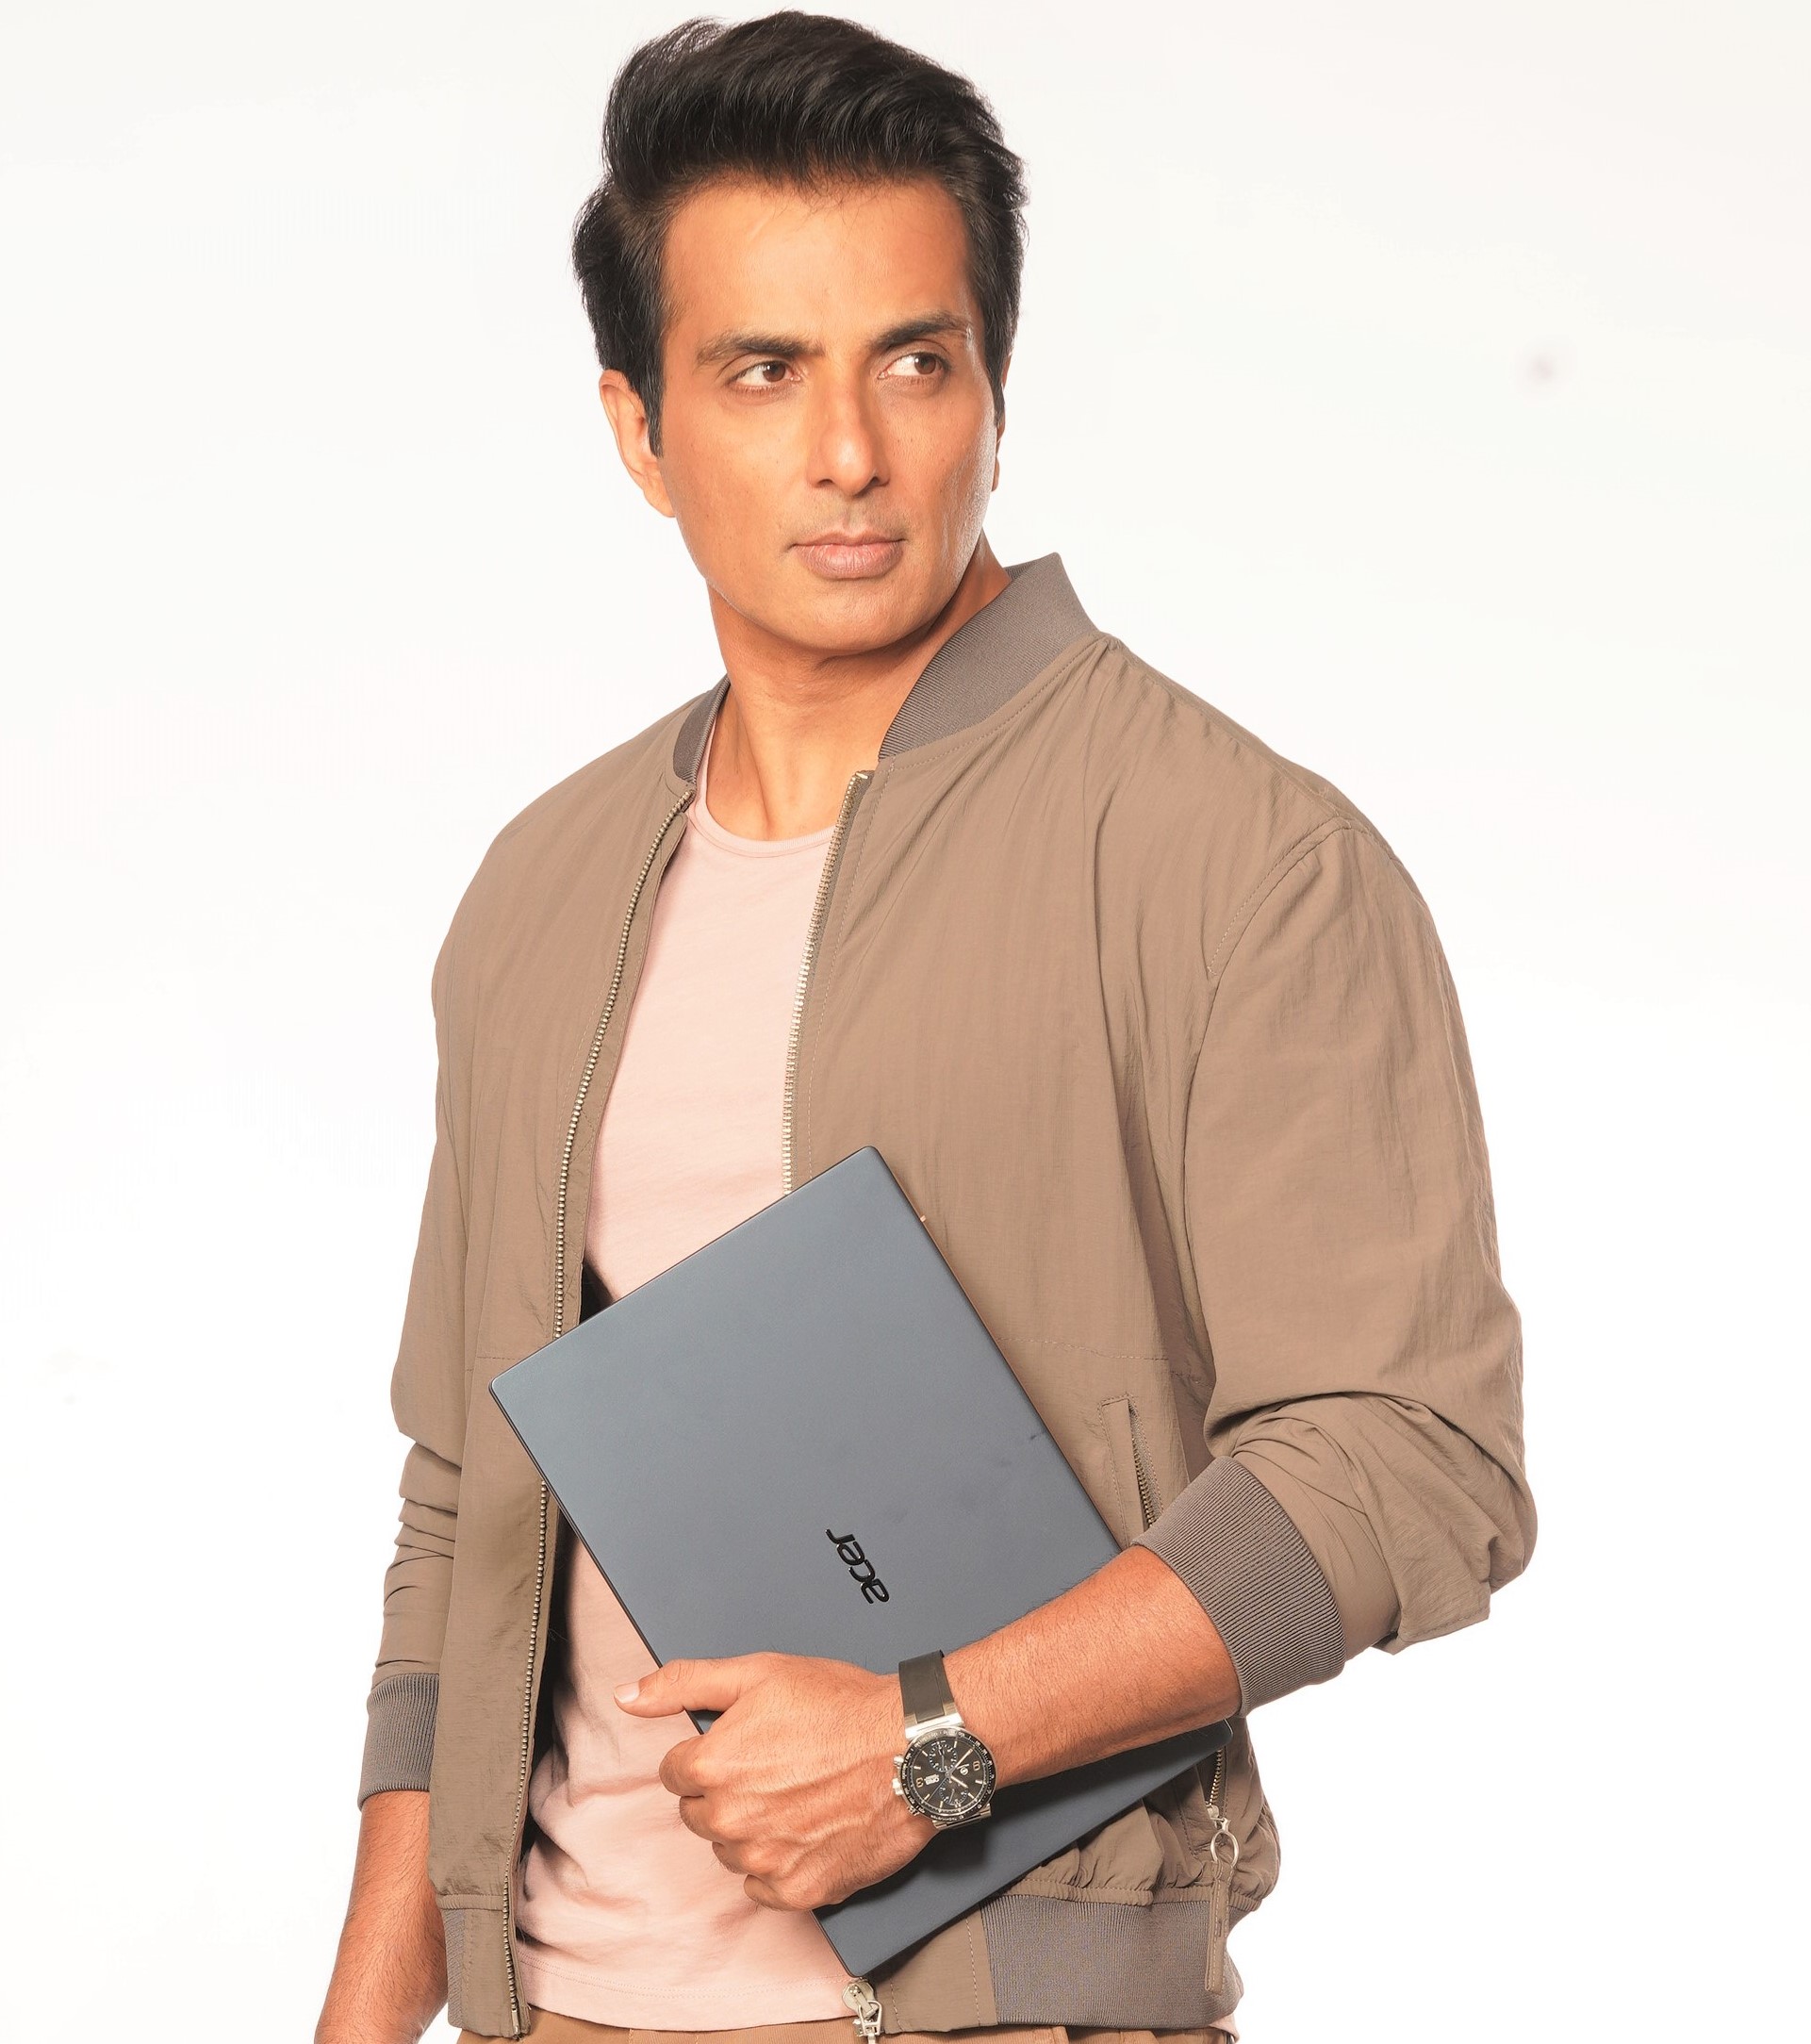 GoodWorker joins hands with Sonu Sood decoding=